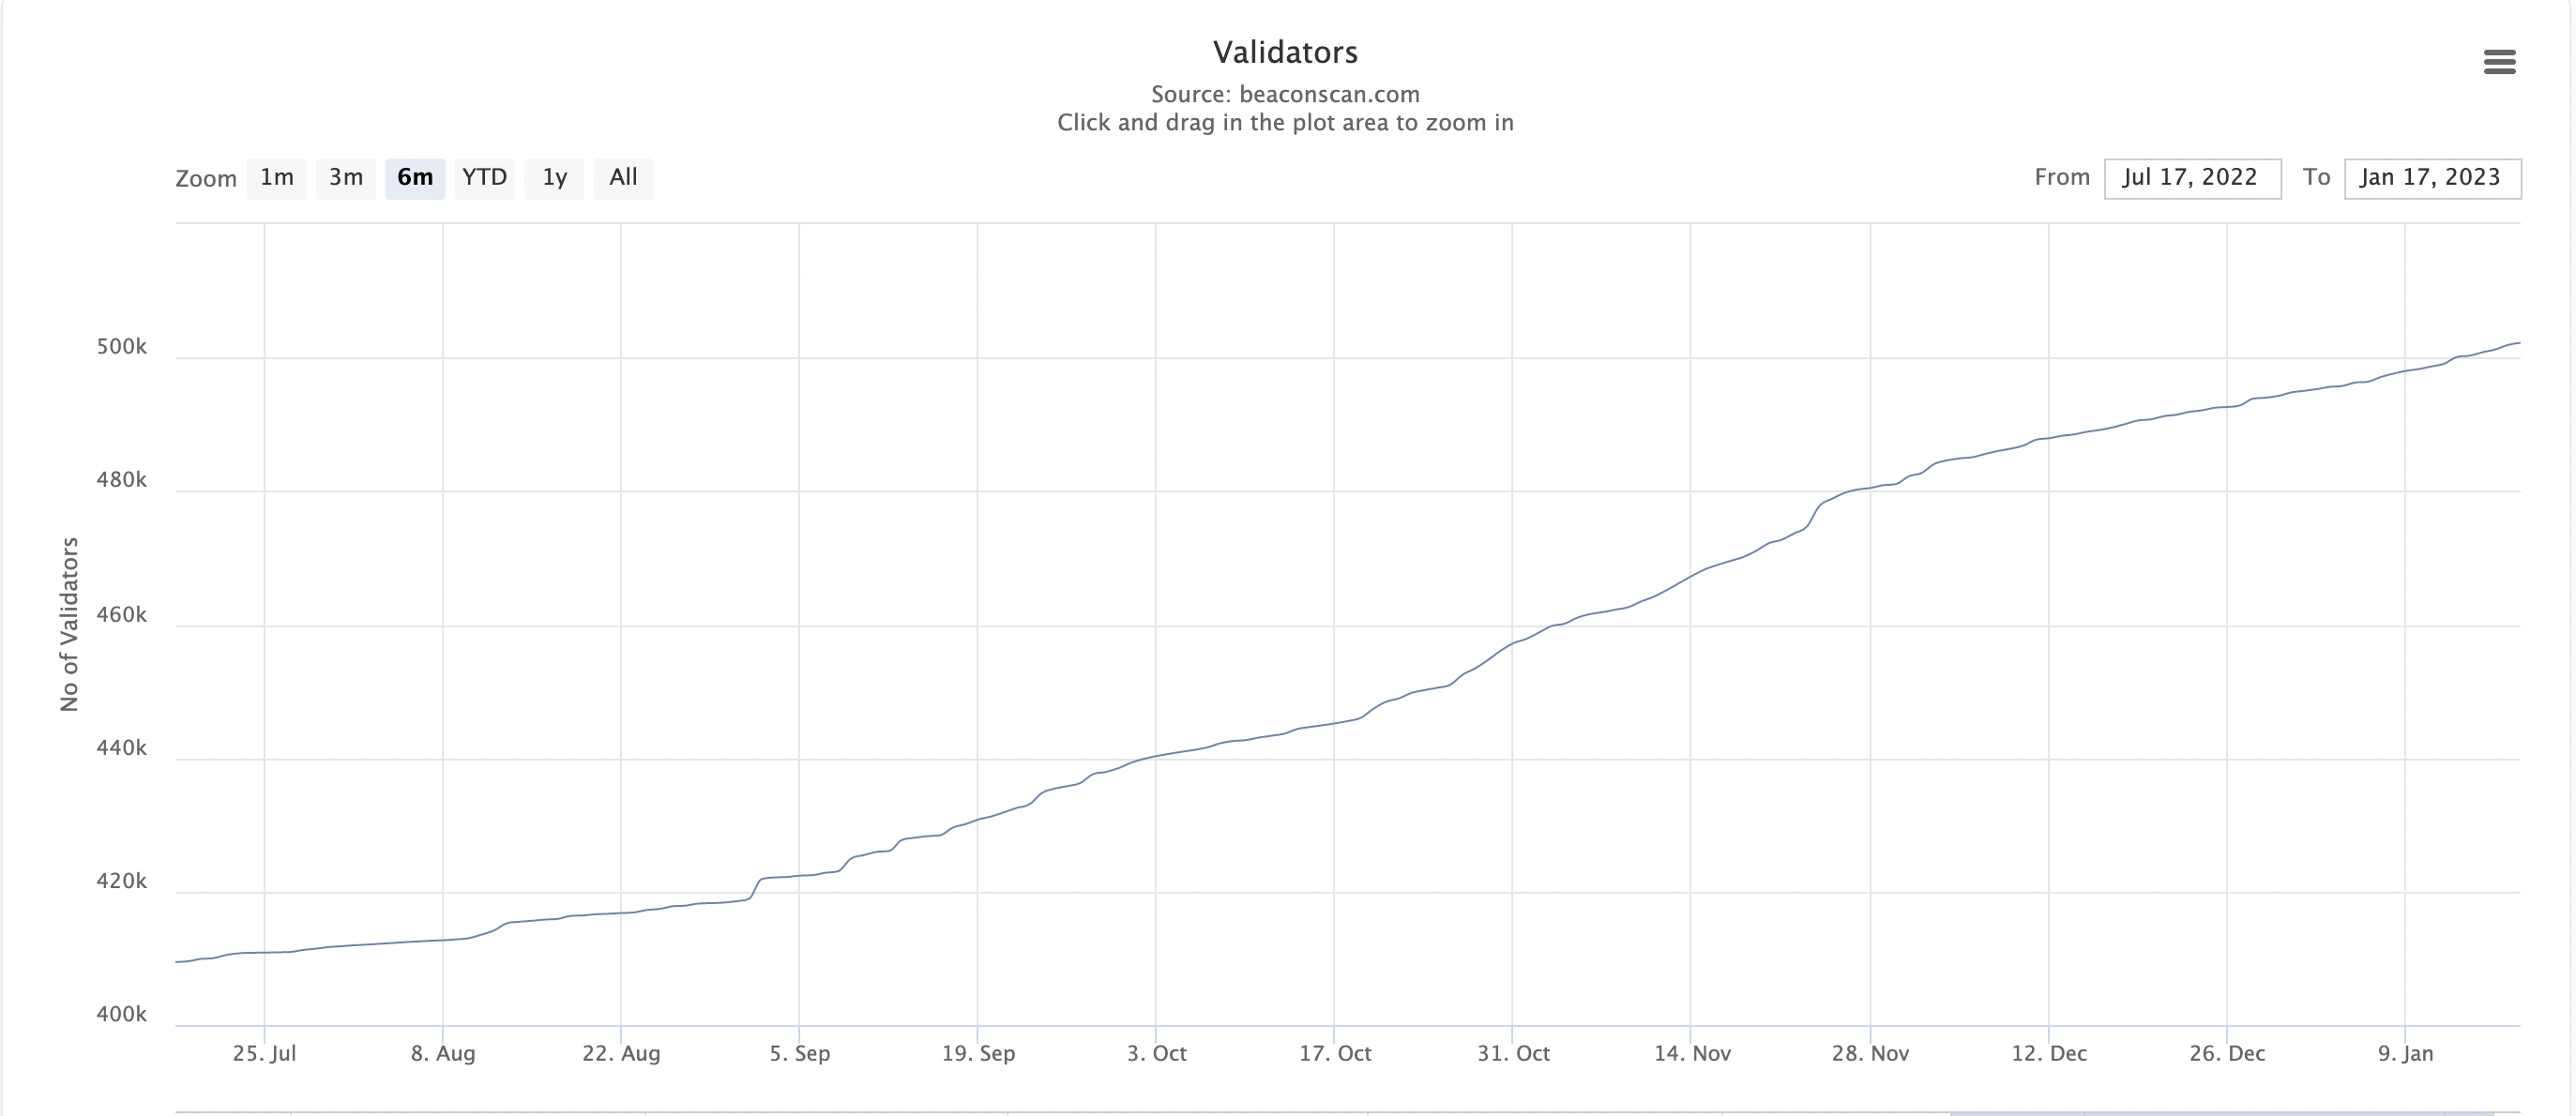 The number of validators being run on the Mainnet Beacon Chain.